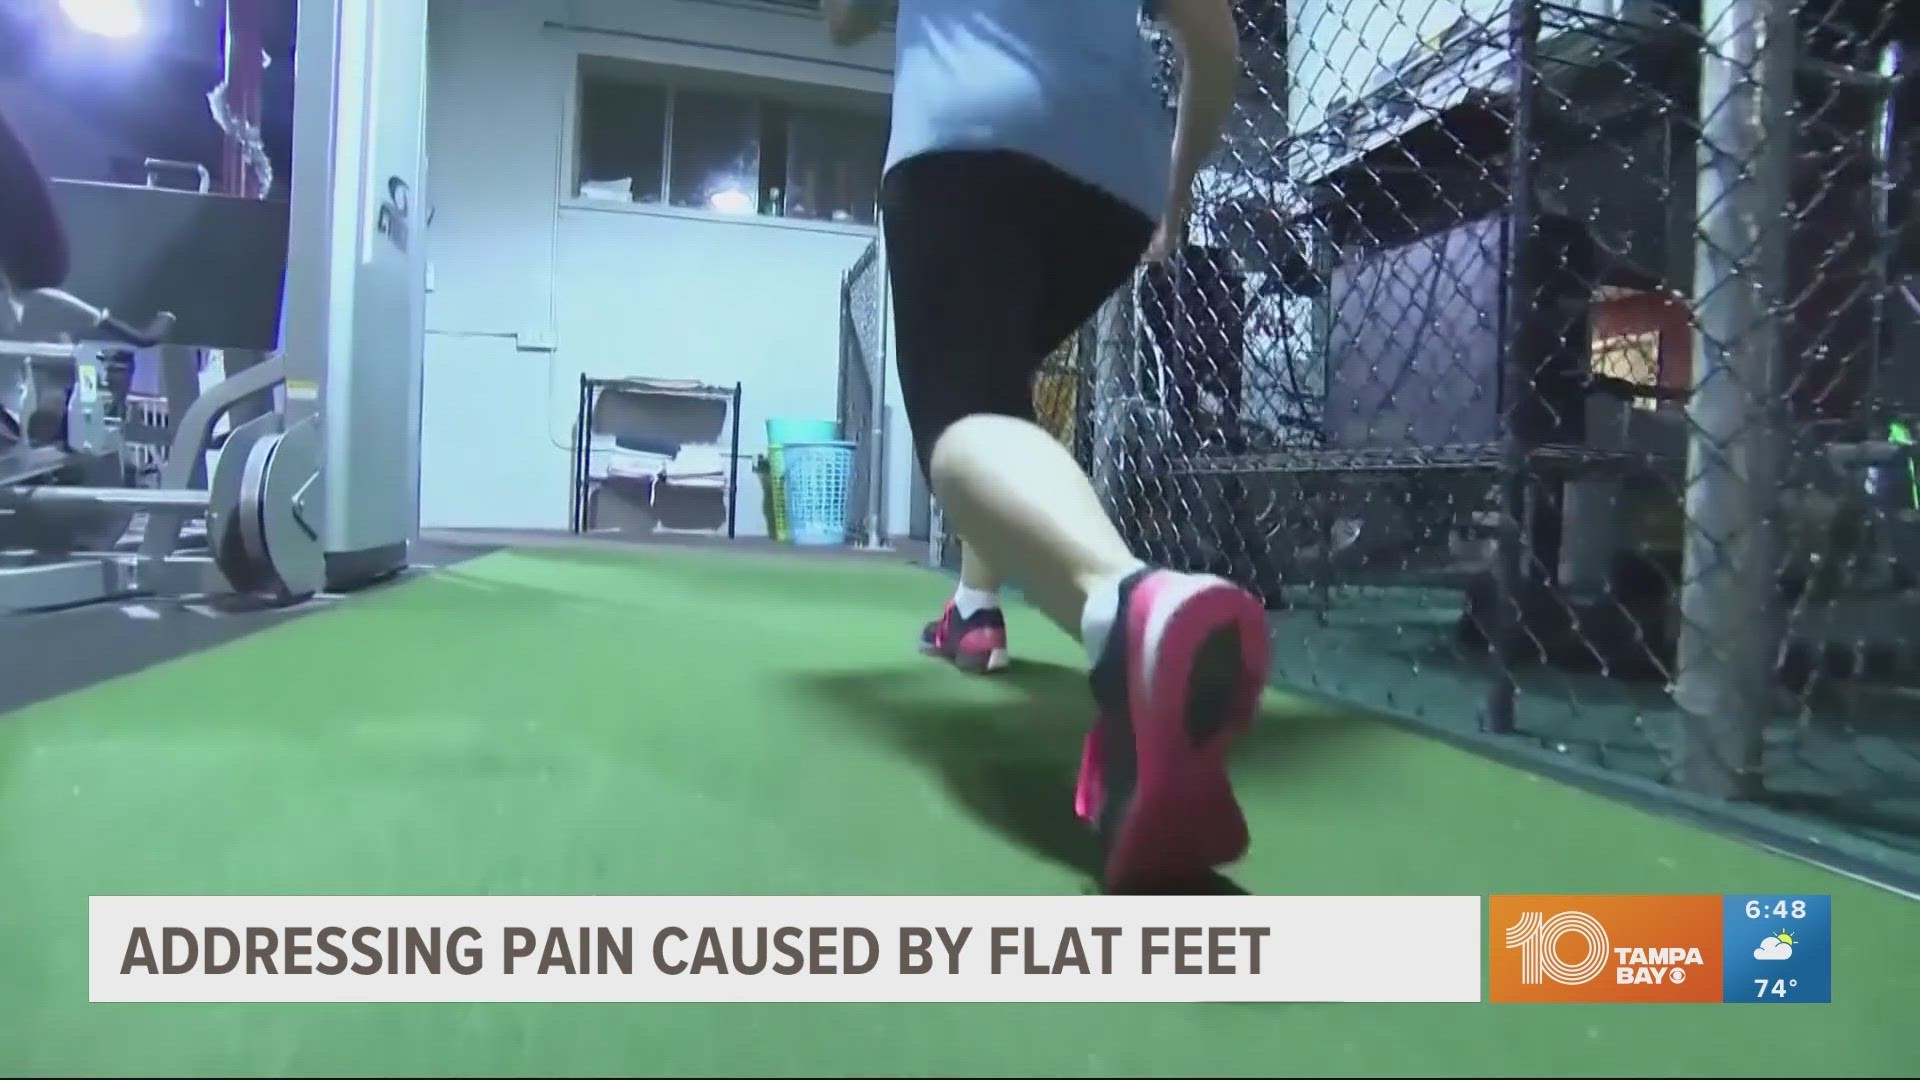 We look at the causes of flat foot pain and what people can do to alleviate it.